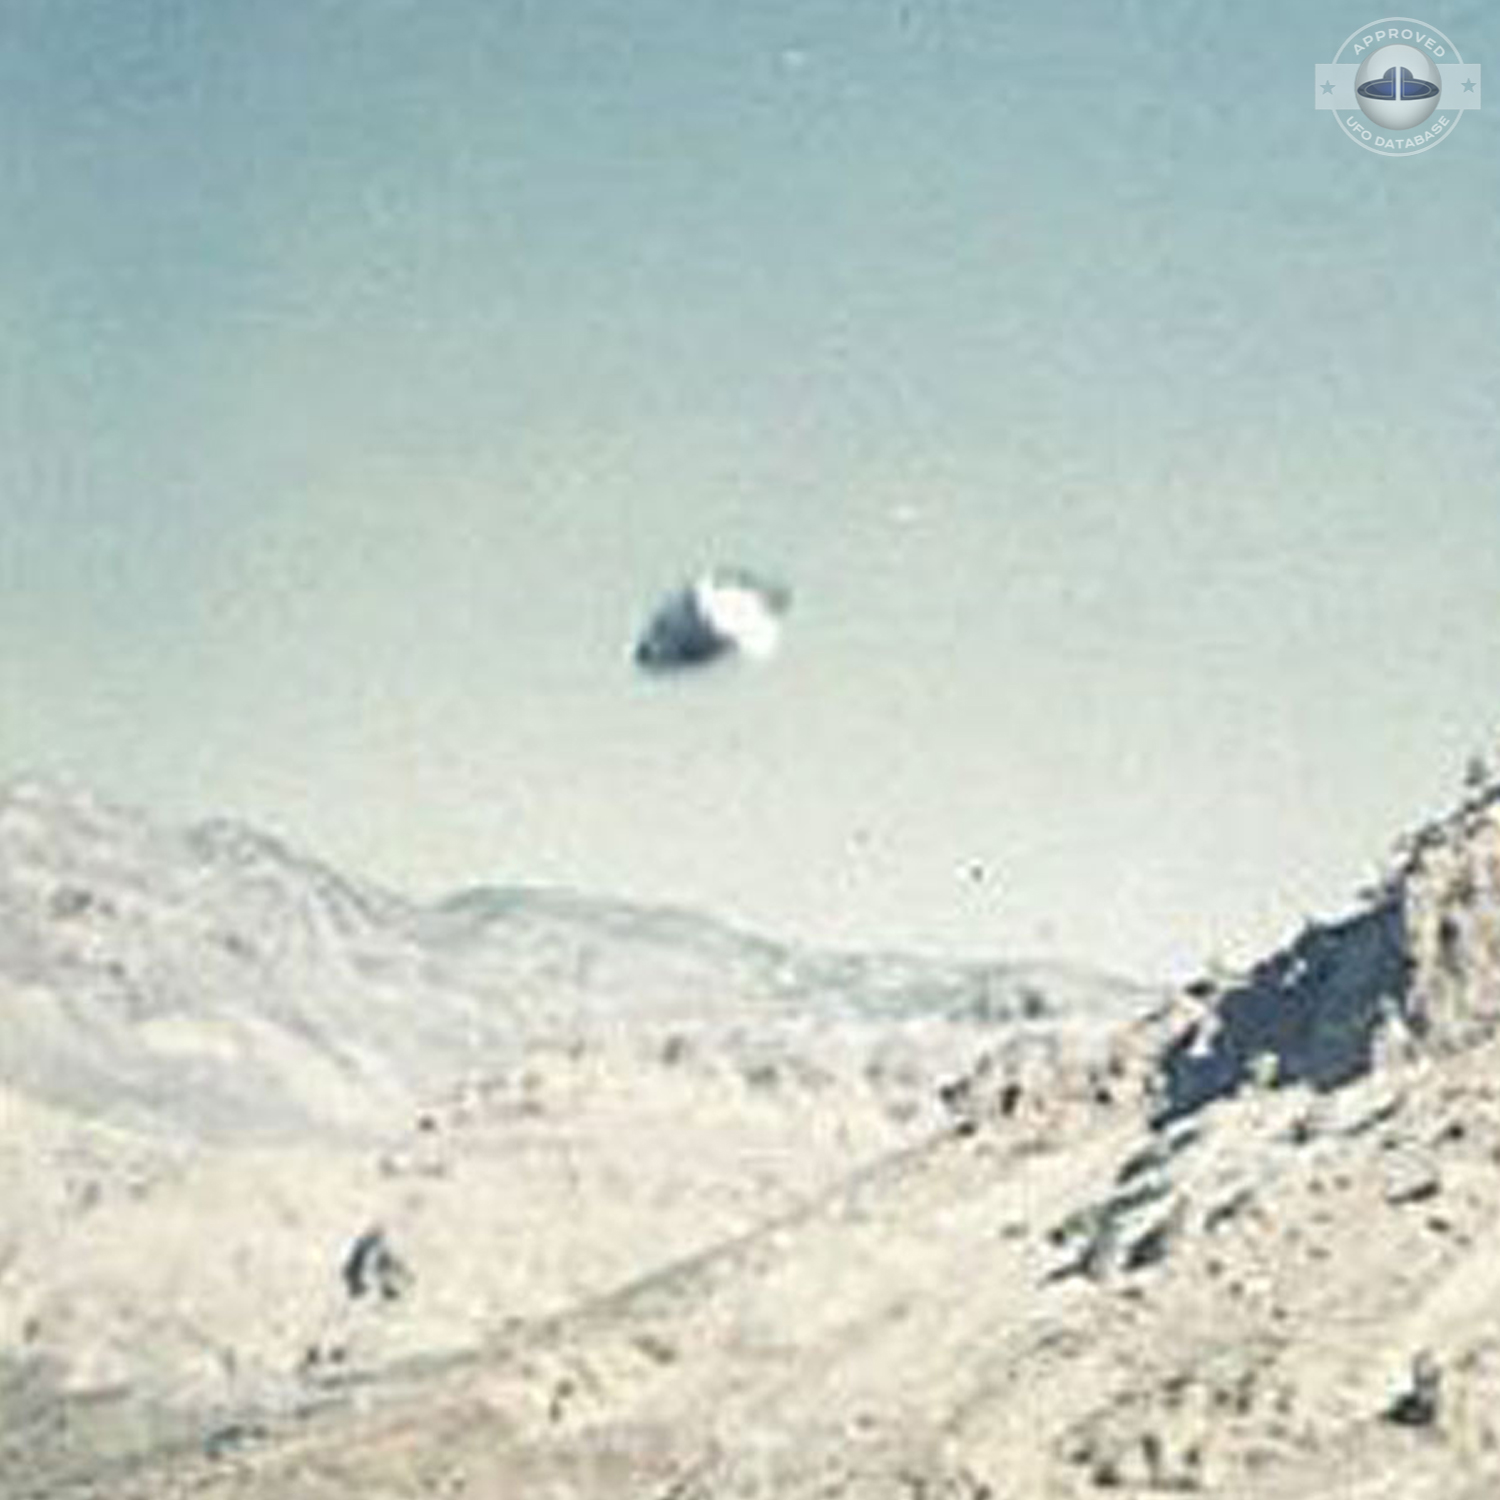 UFO pictures - UFO over mountains in the state of New Mexico UFO Picture #8-2